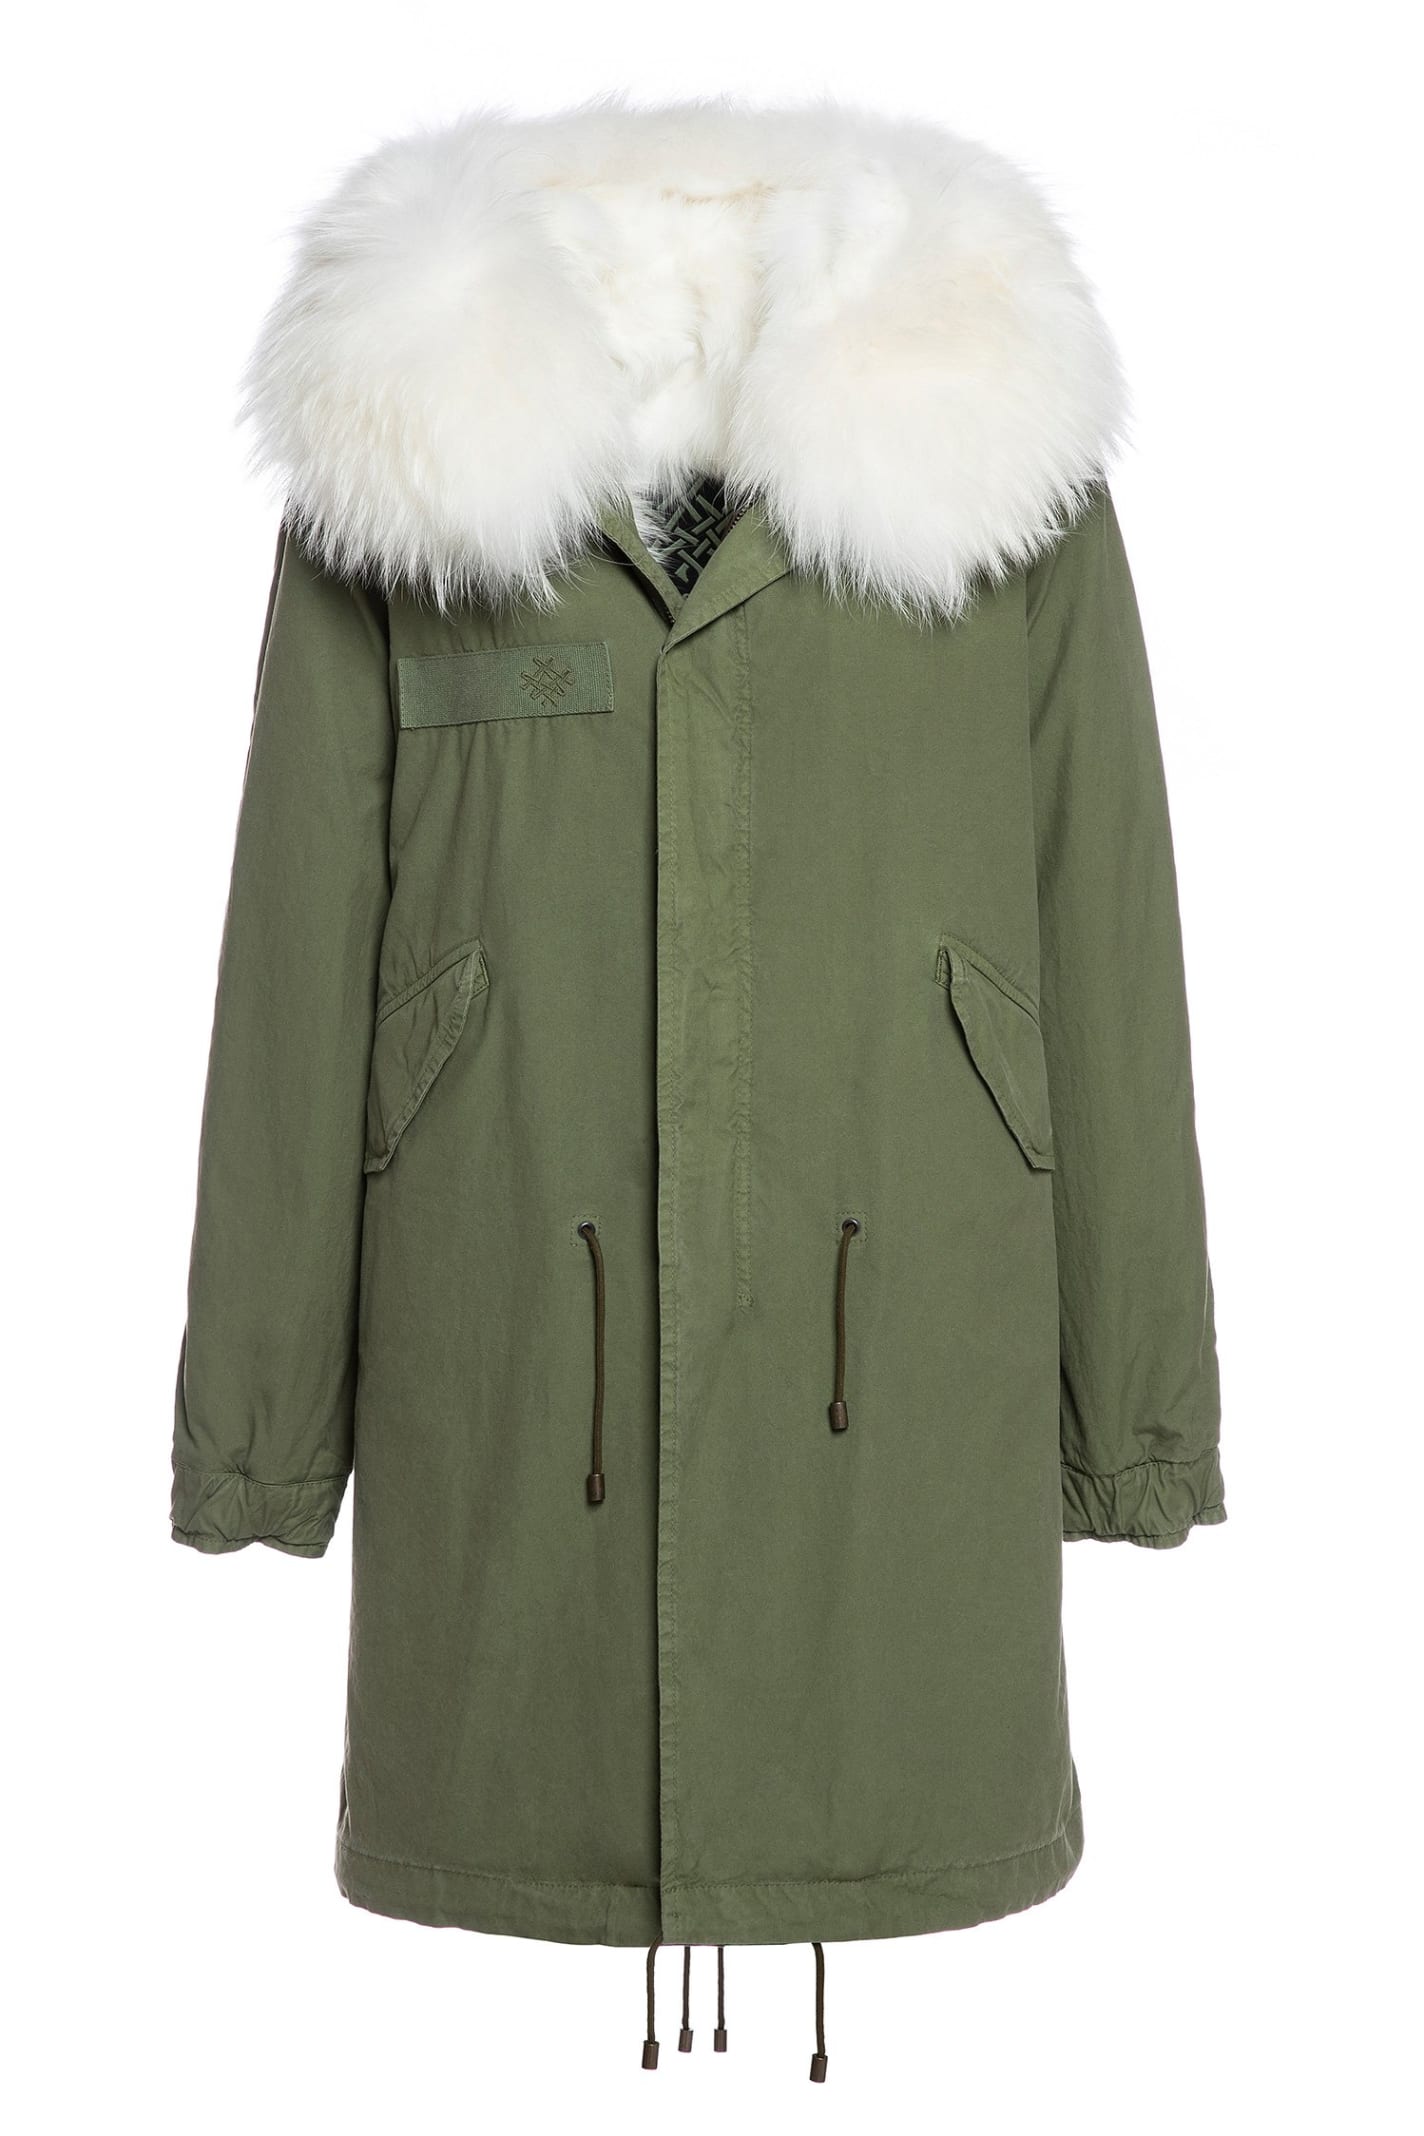 Mr & Mrs Italy Army Cotton Canvas Parka With Fox Fur Lining